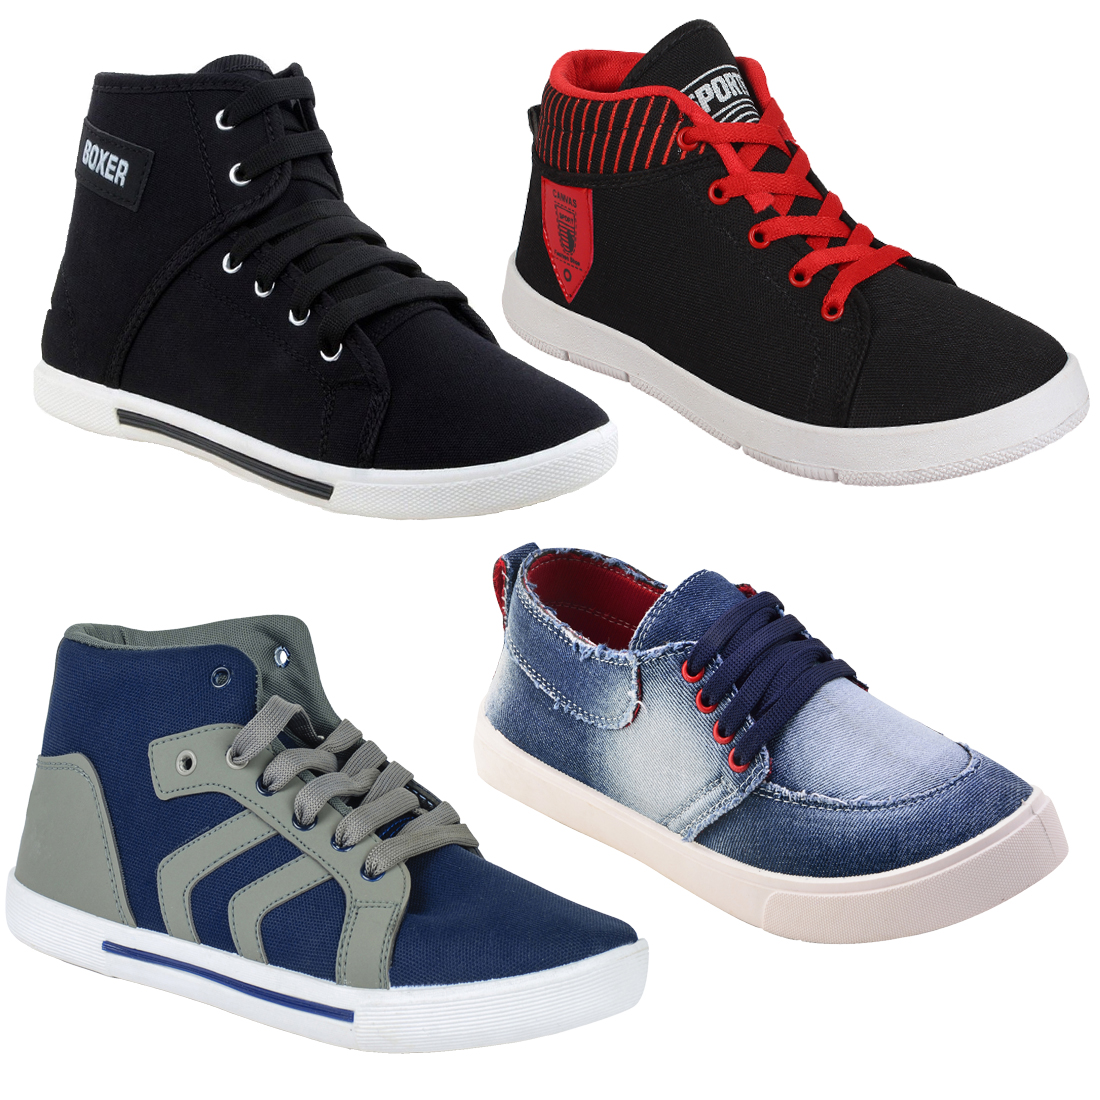 Buy Super Men Combo Pack of 4 (Casual Sneakers Shoes) Online @ ₹1996 ...